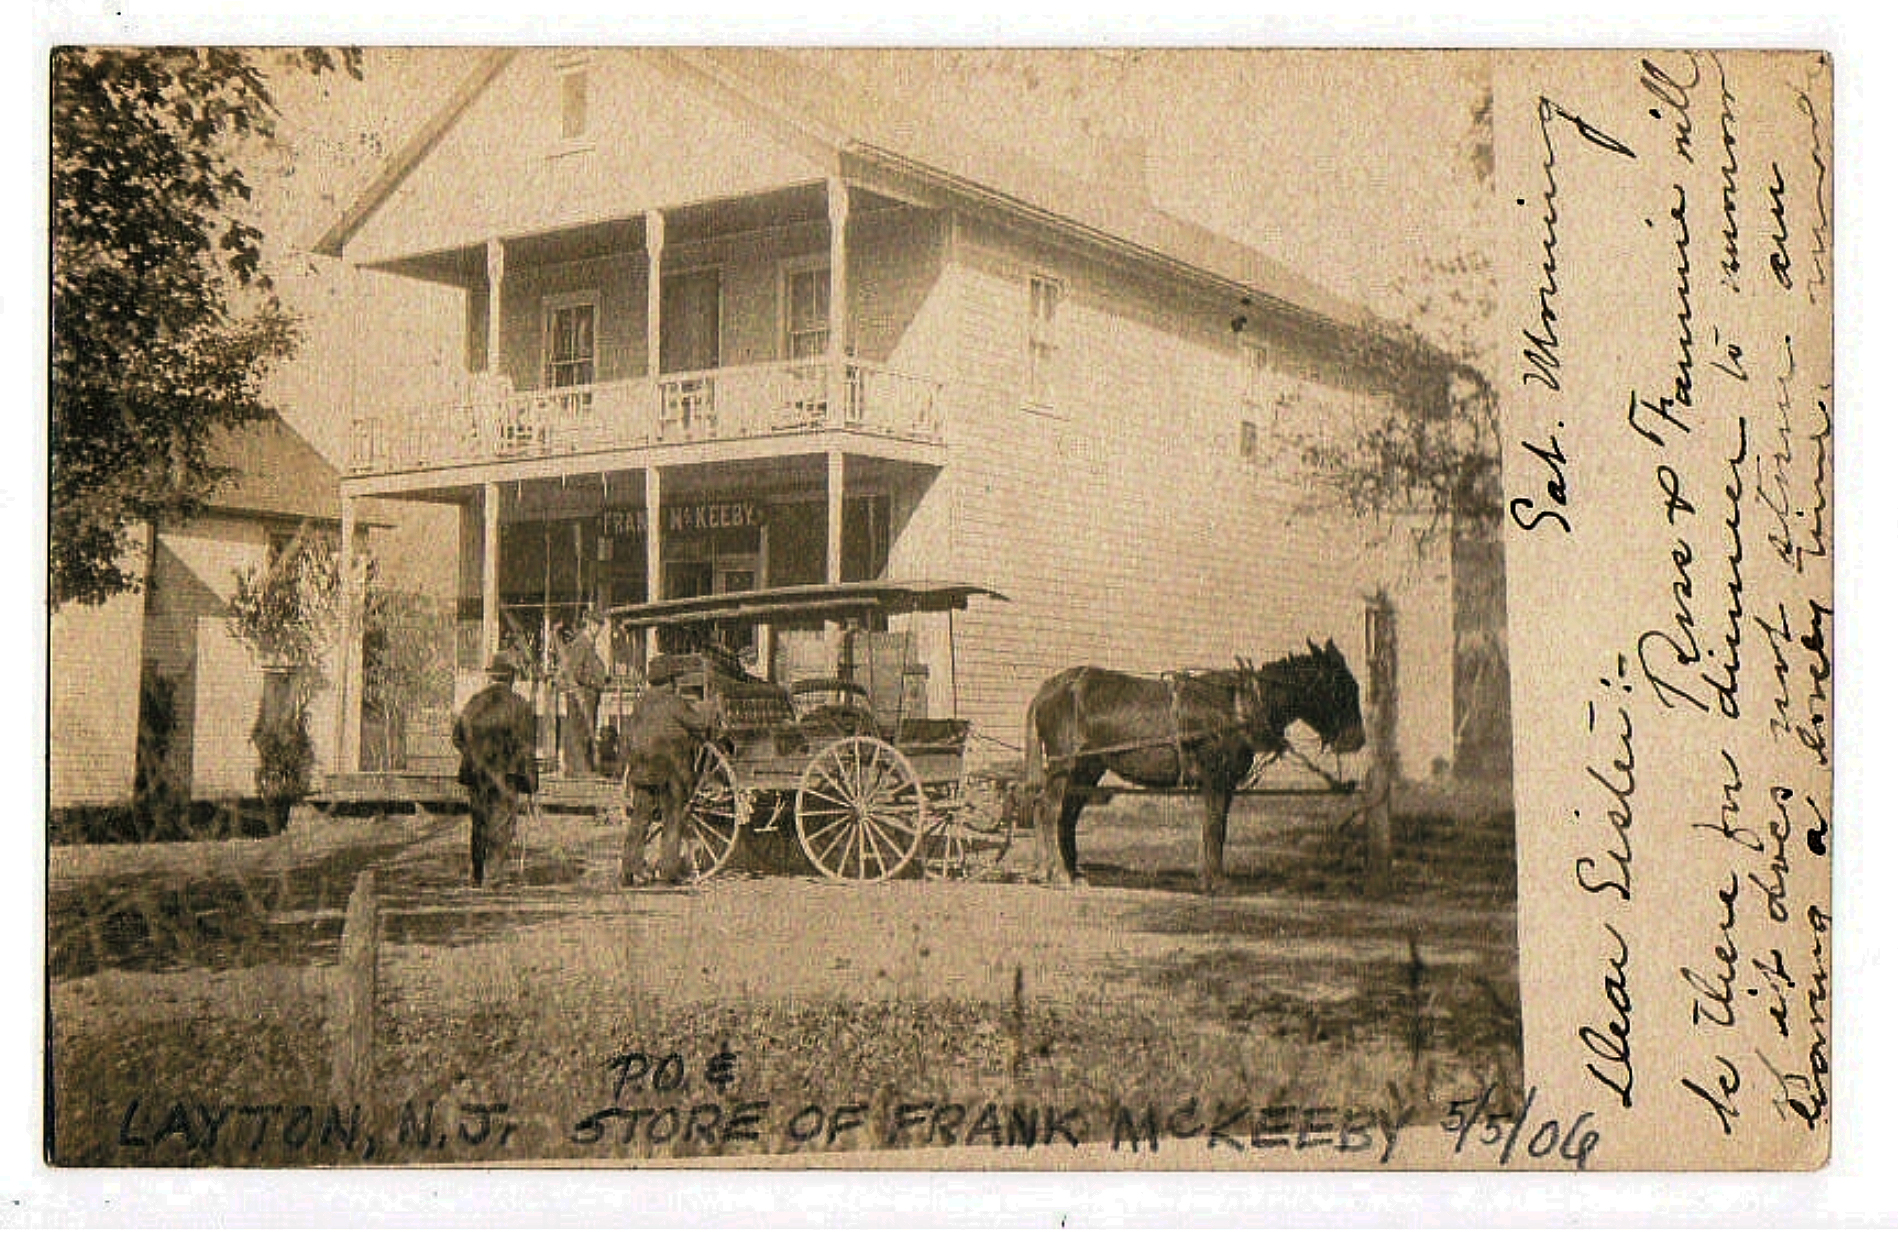 Layton - Store of Frank McKeesby and Post Office - 1906